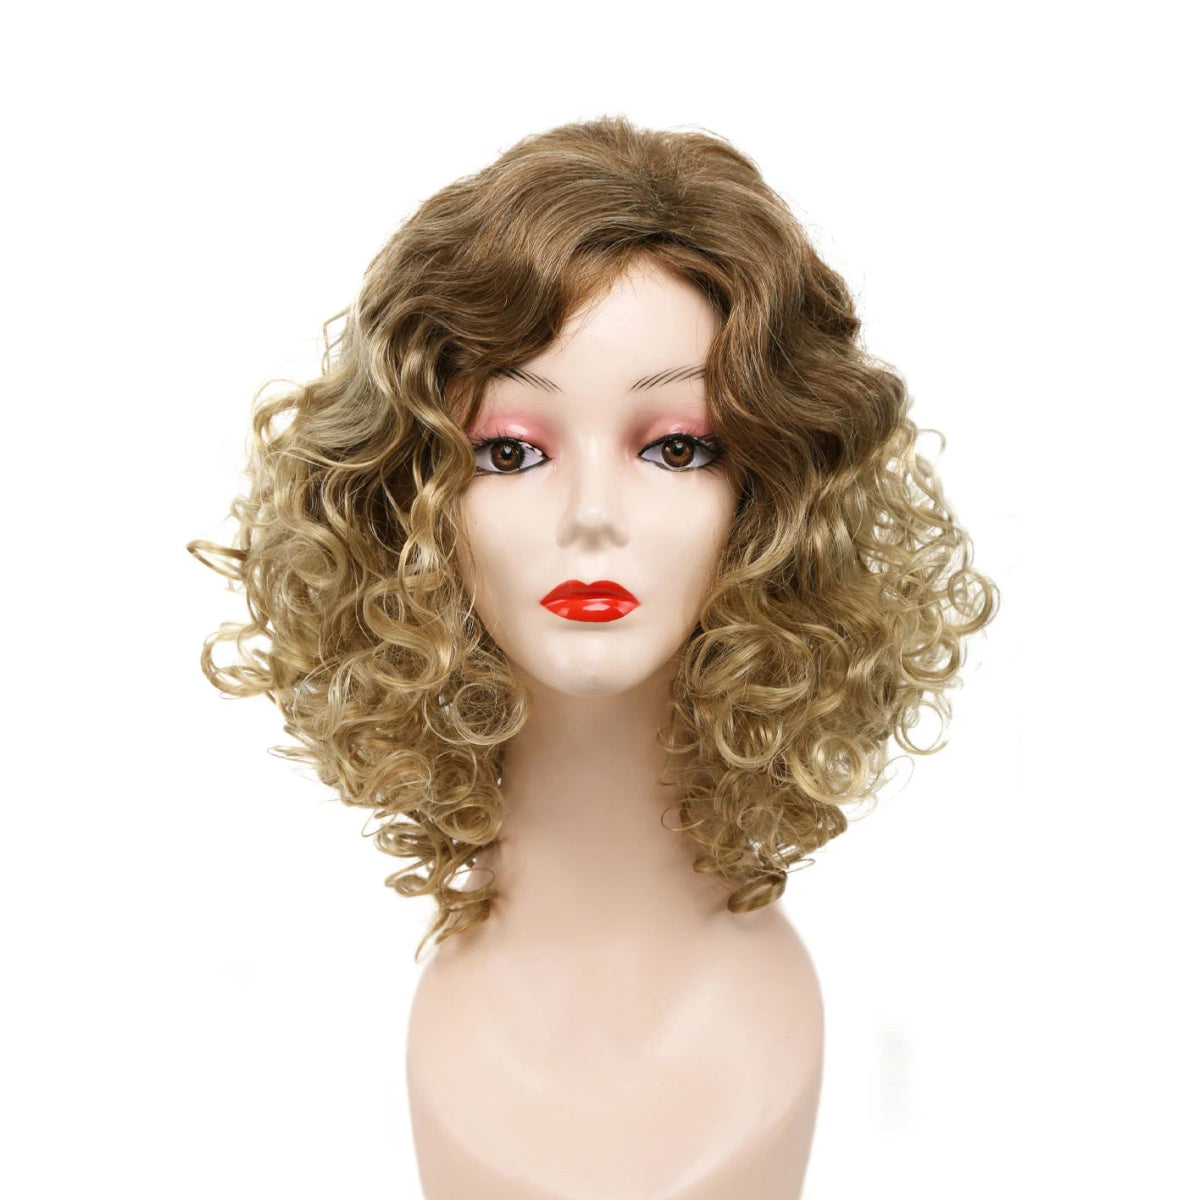 Amir Synthetic Wig Afro Curly Hair Wigs Brown Short Kinky Curly Fluffy Blond Wigs - Flexi Africa - Free Delivery Worldwide only at www.flexiafrica.com